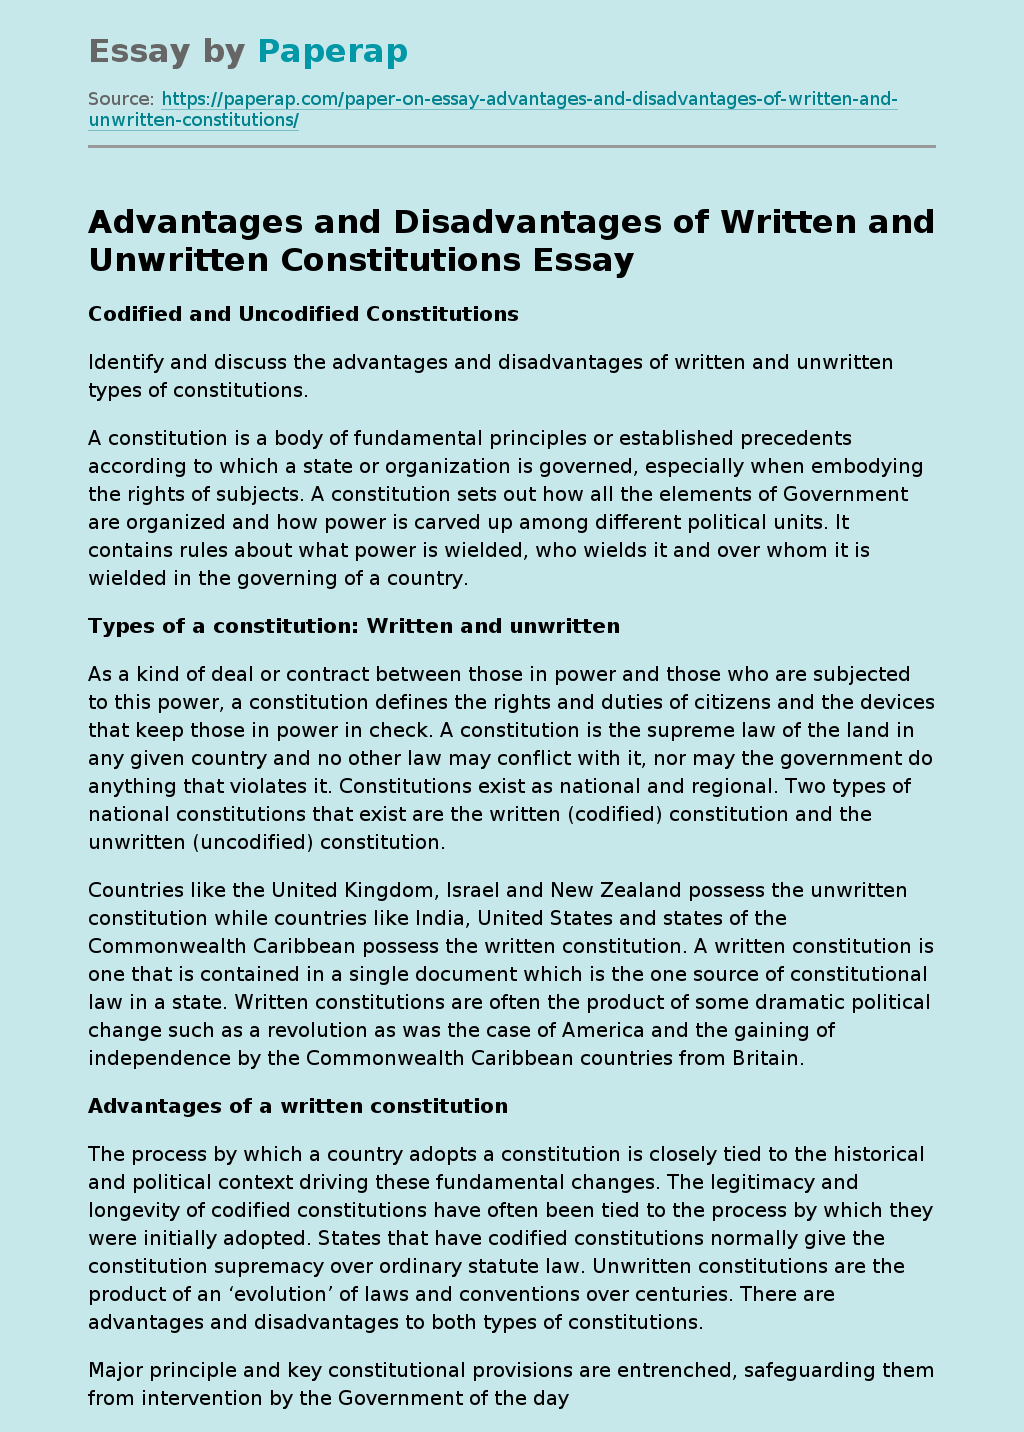 Advantages and Disadvantages of Written and Unwritten Constitutions